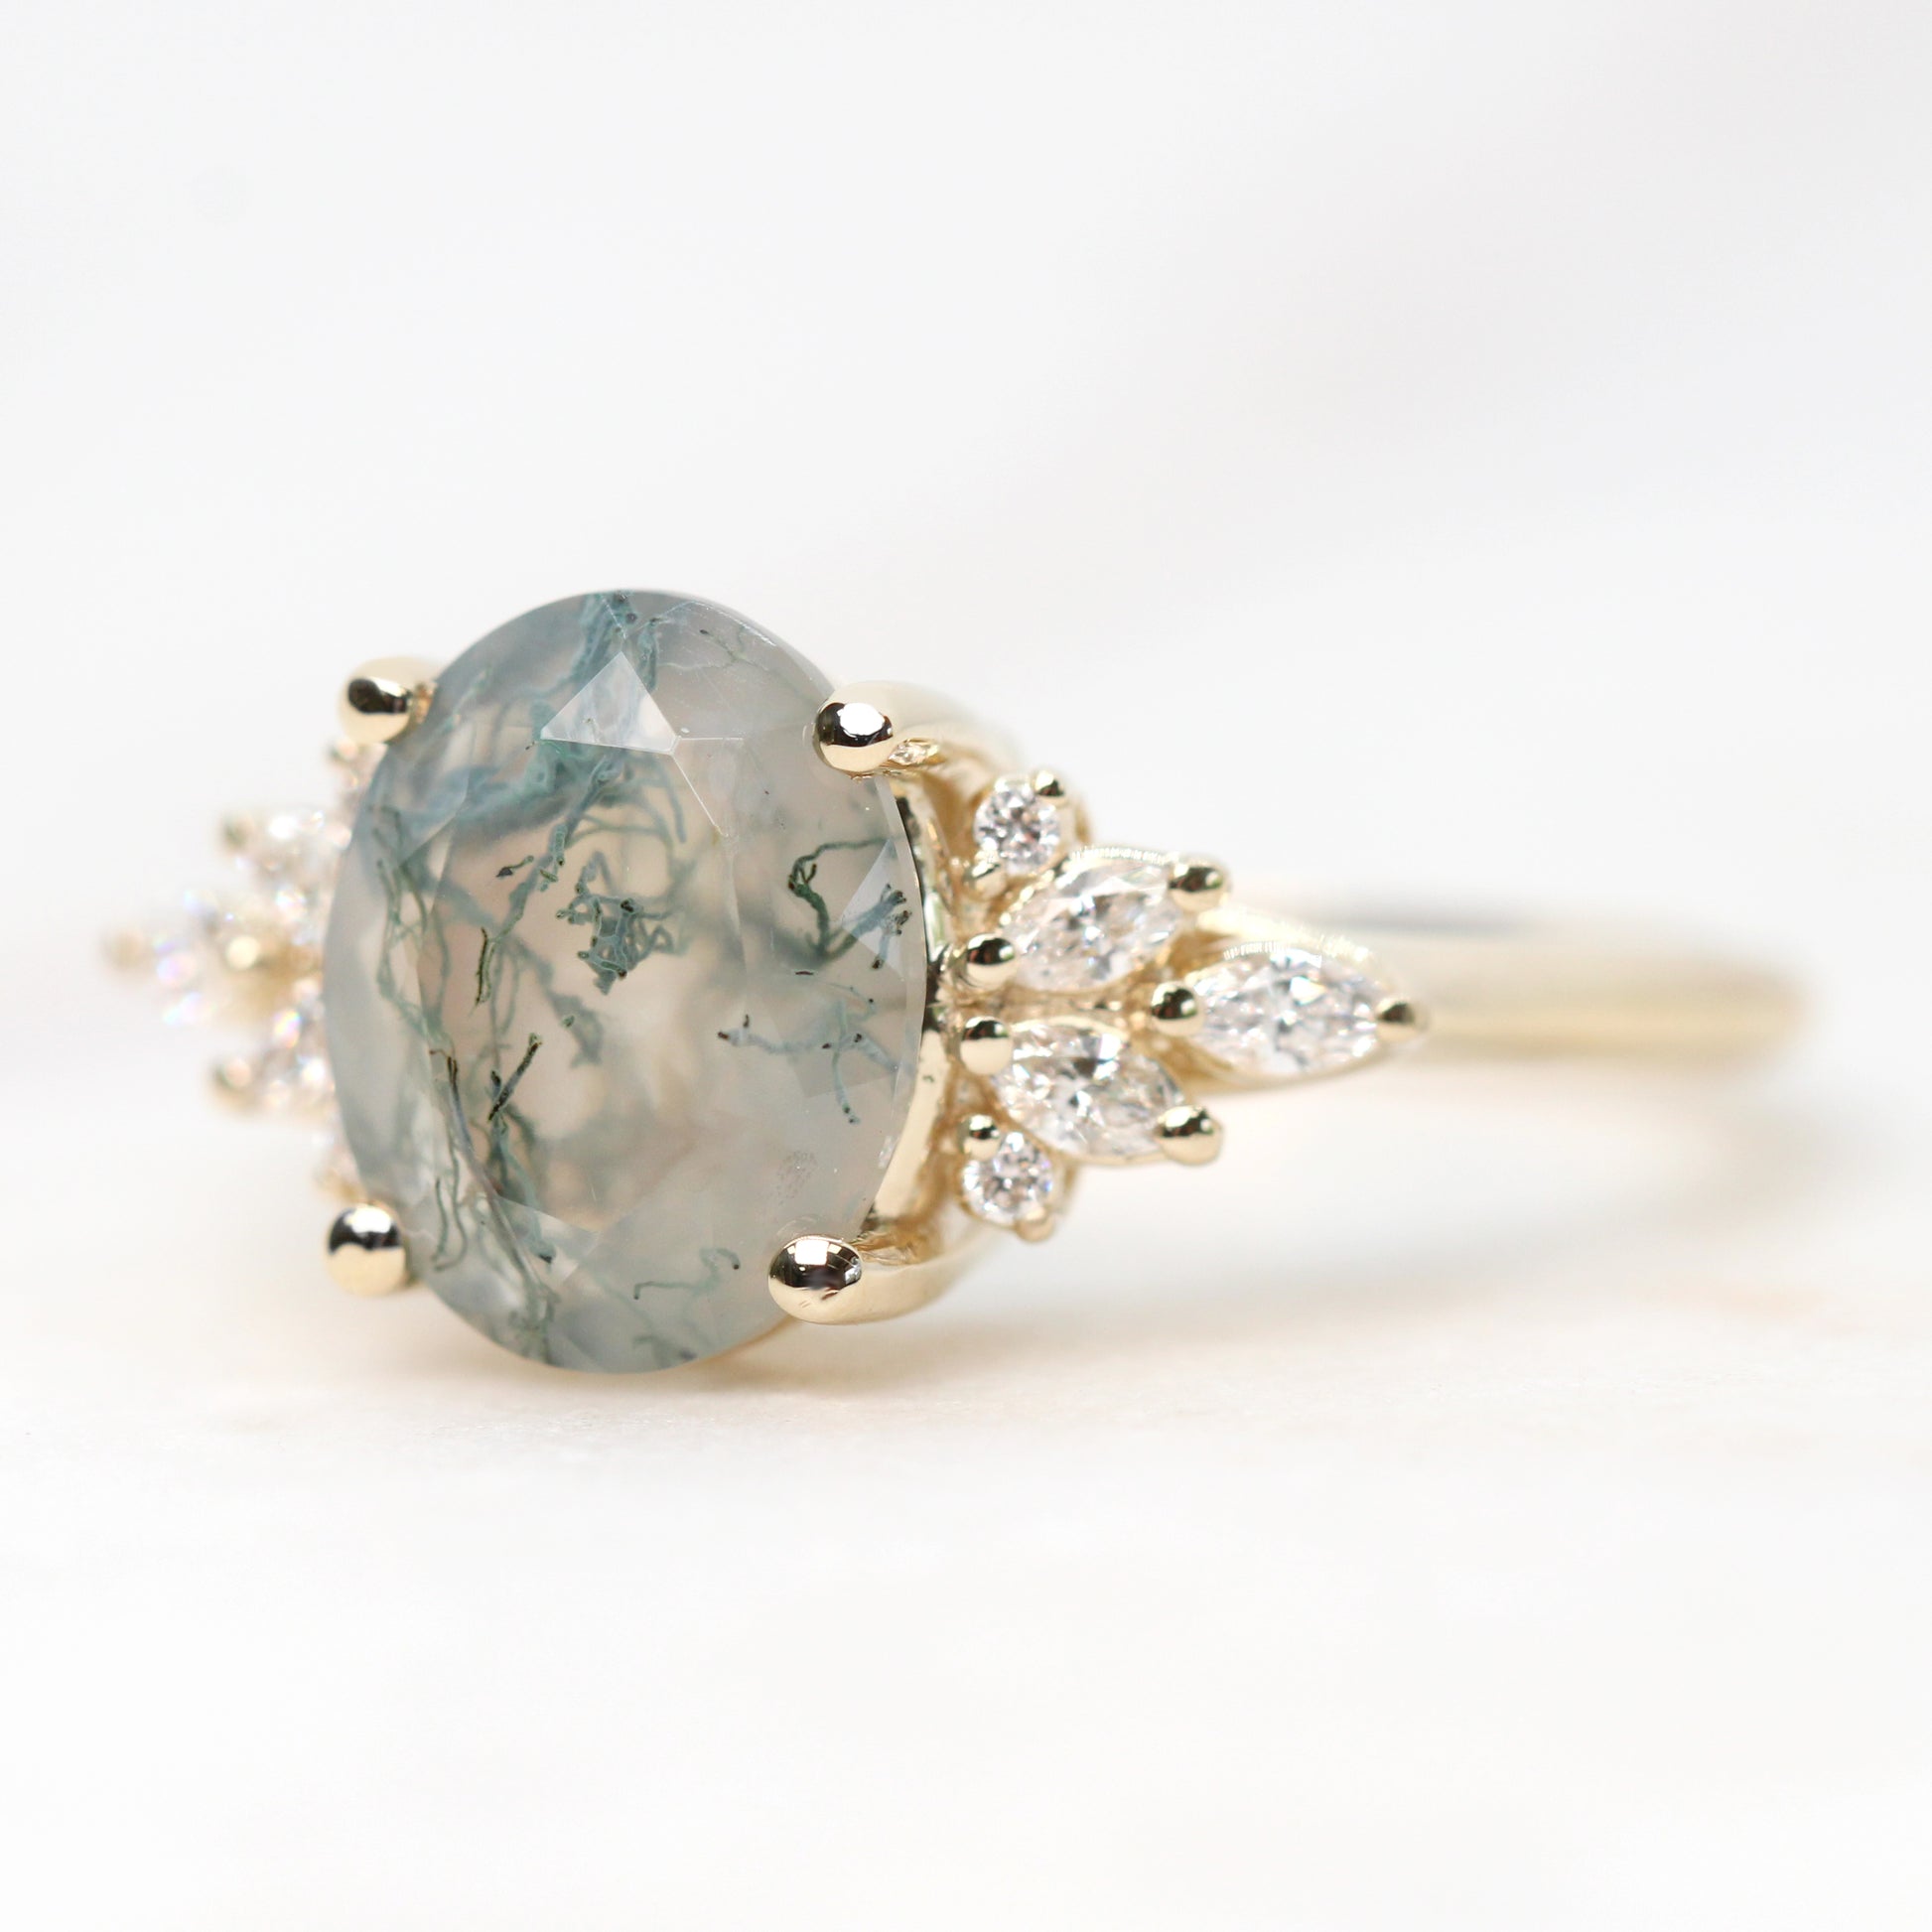 Odette Ring with an Oval Moss Agate and White Accent Diamonds - Made to Order, Your Choice of 14k Gold - Midwinter Co. Alternative Bridal Rings and Modern Fine Jewelry